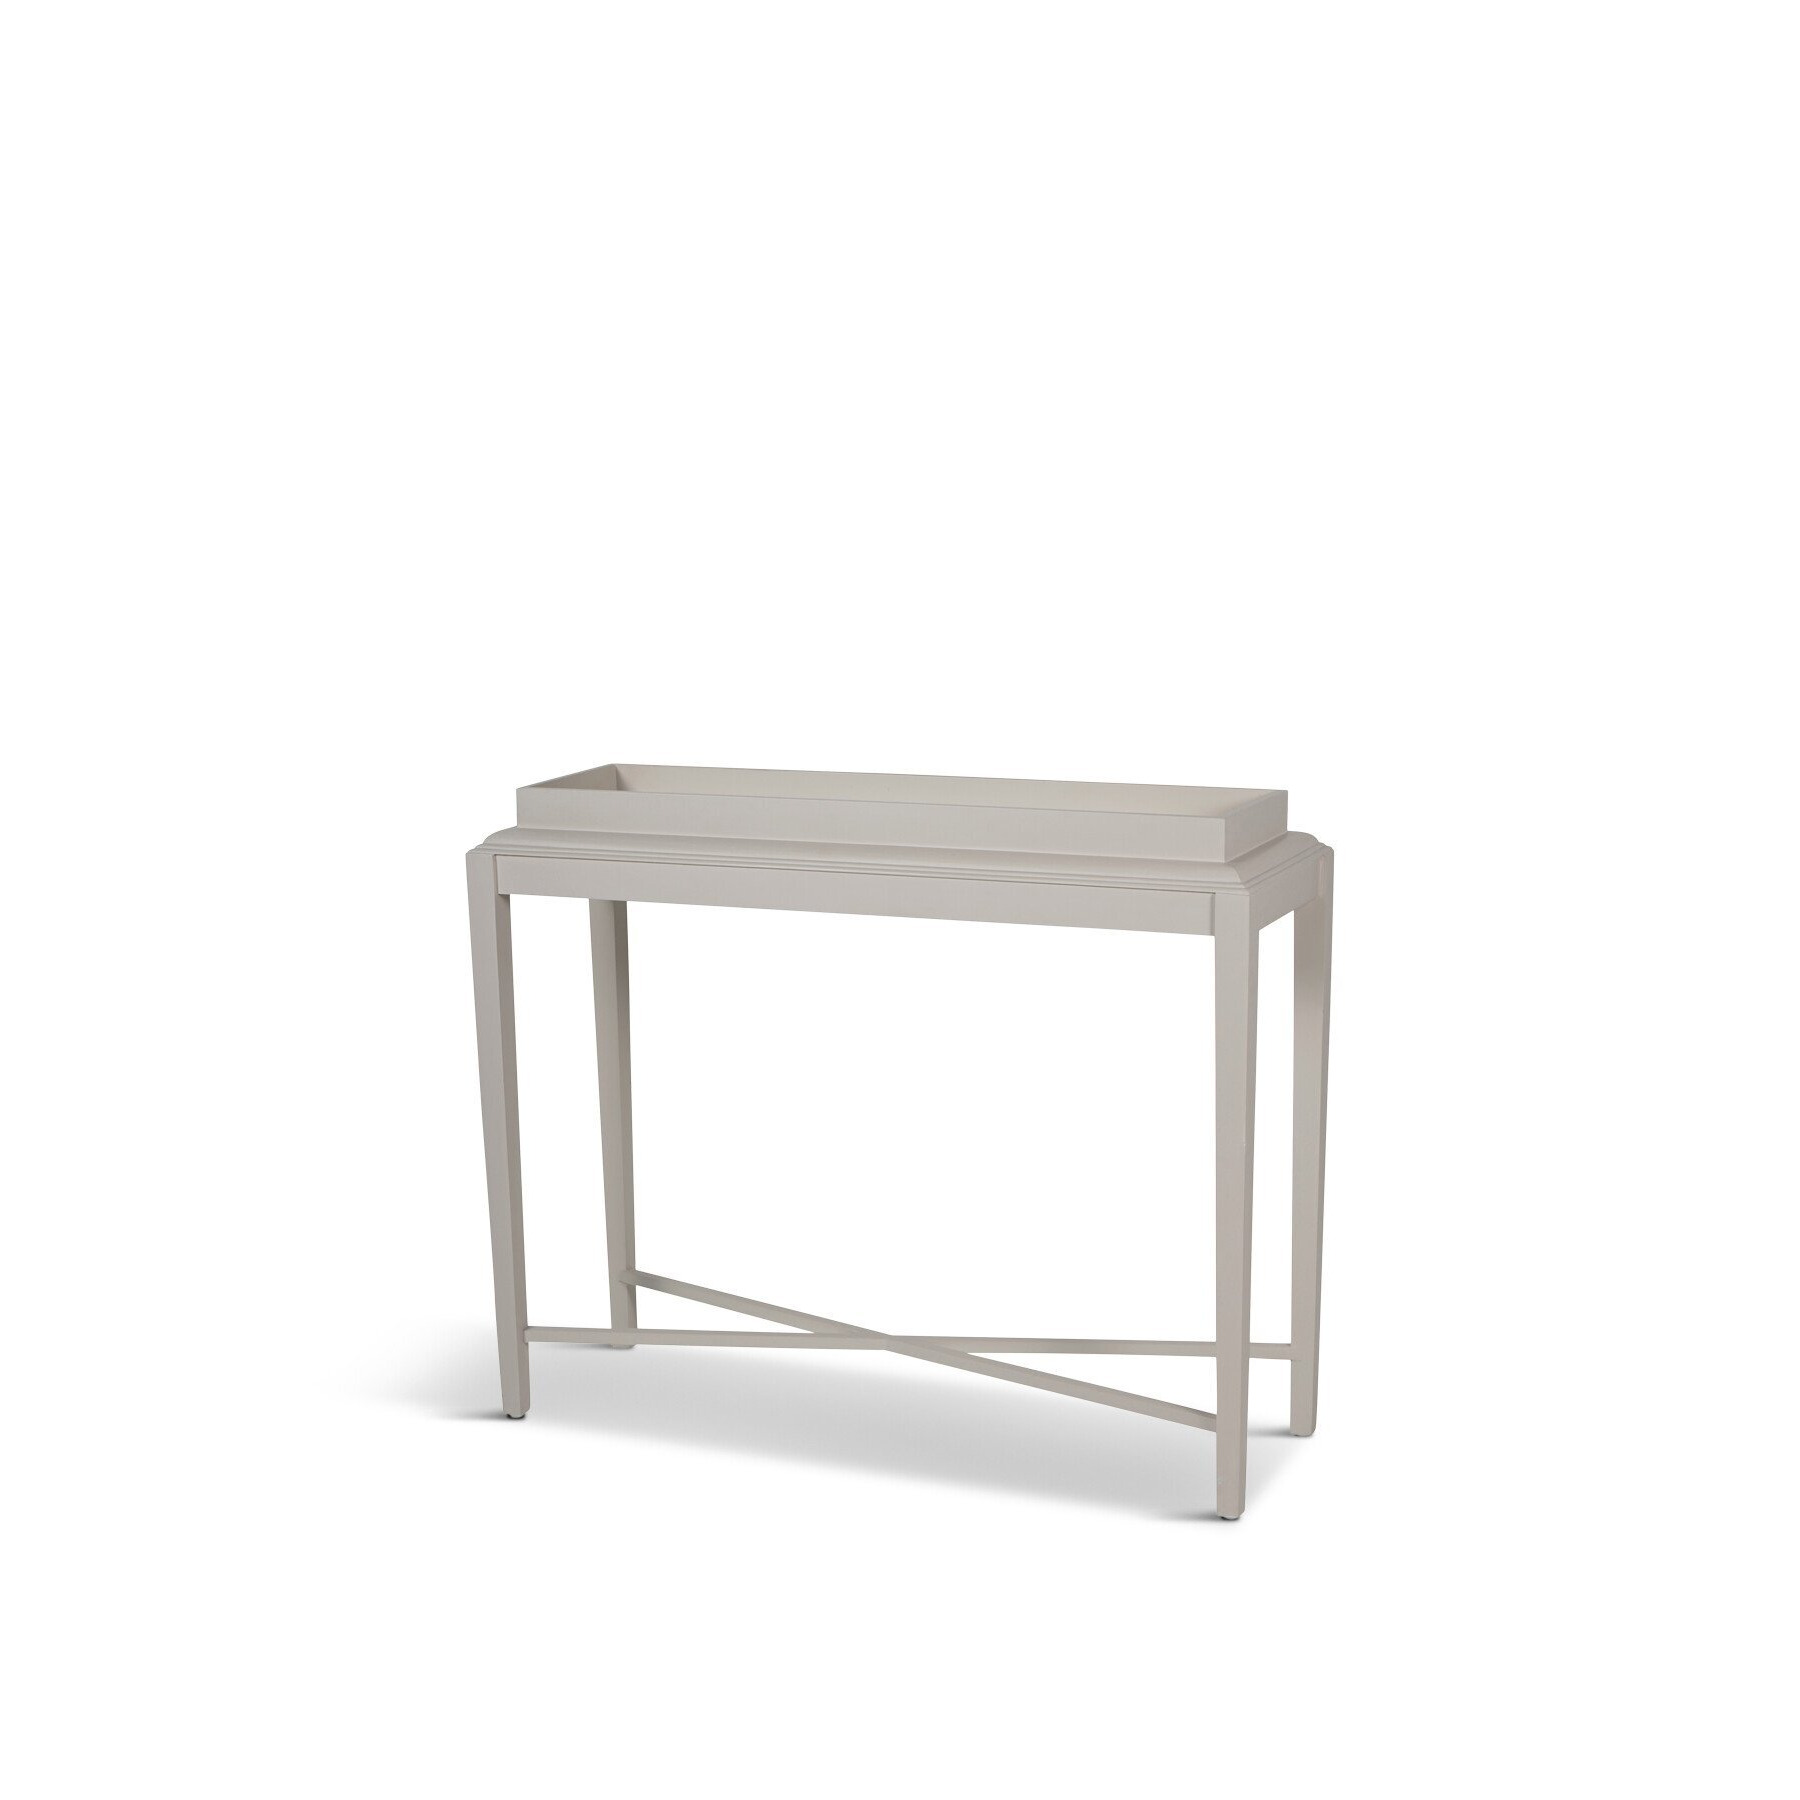 Laura Ashley Dove Grey Northall Console Table - Size 107x86x36 - image 1